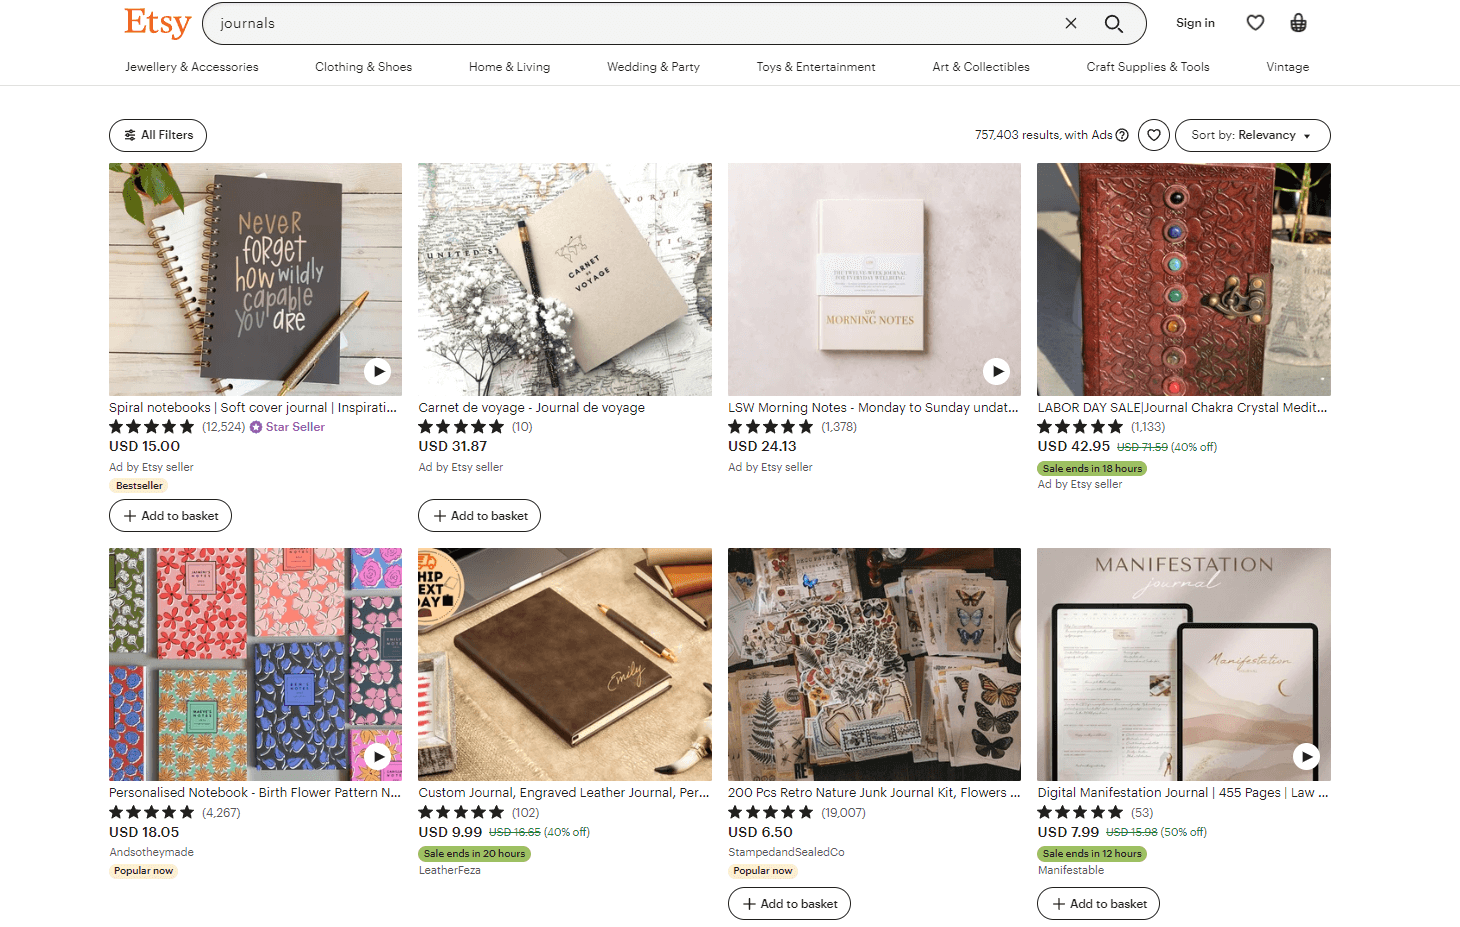 Journals best selling items on Etsy